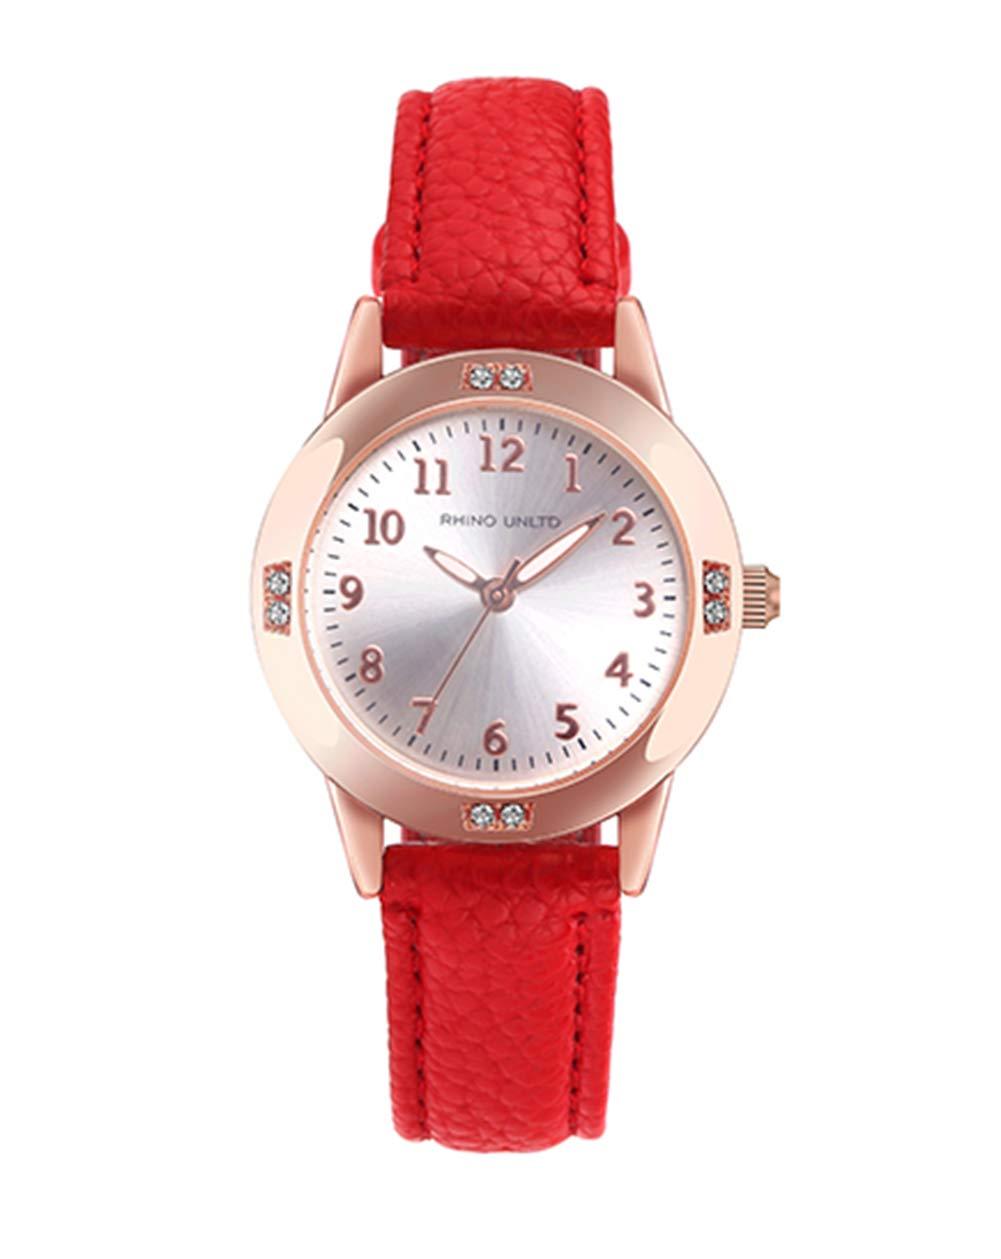 [Australia] - Girls Watches Ladies Watch for Gift Students Watches for Girls age11-15 Simple Japanese Movement Casual Leather Band Watches for Kid Ladies Fashion Women Watches Red 